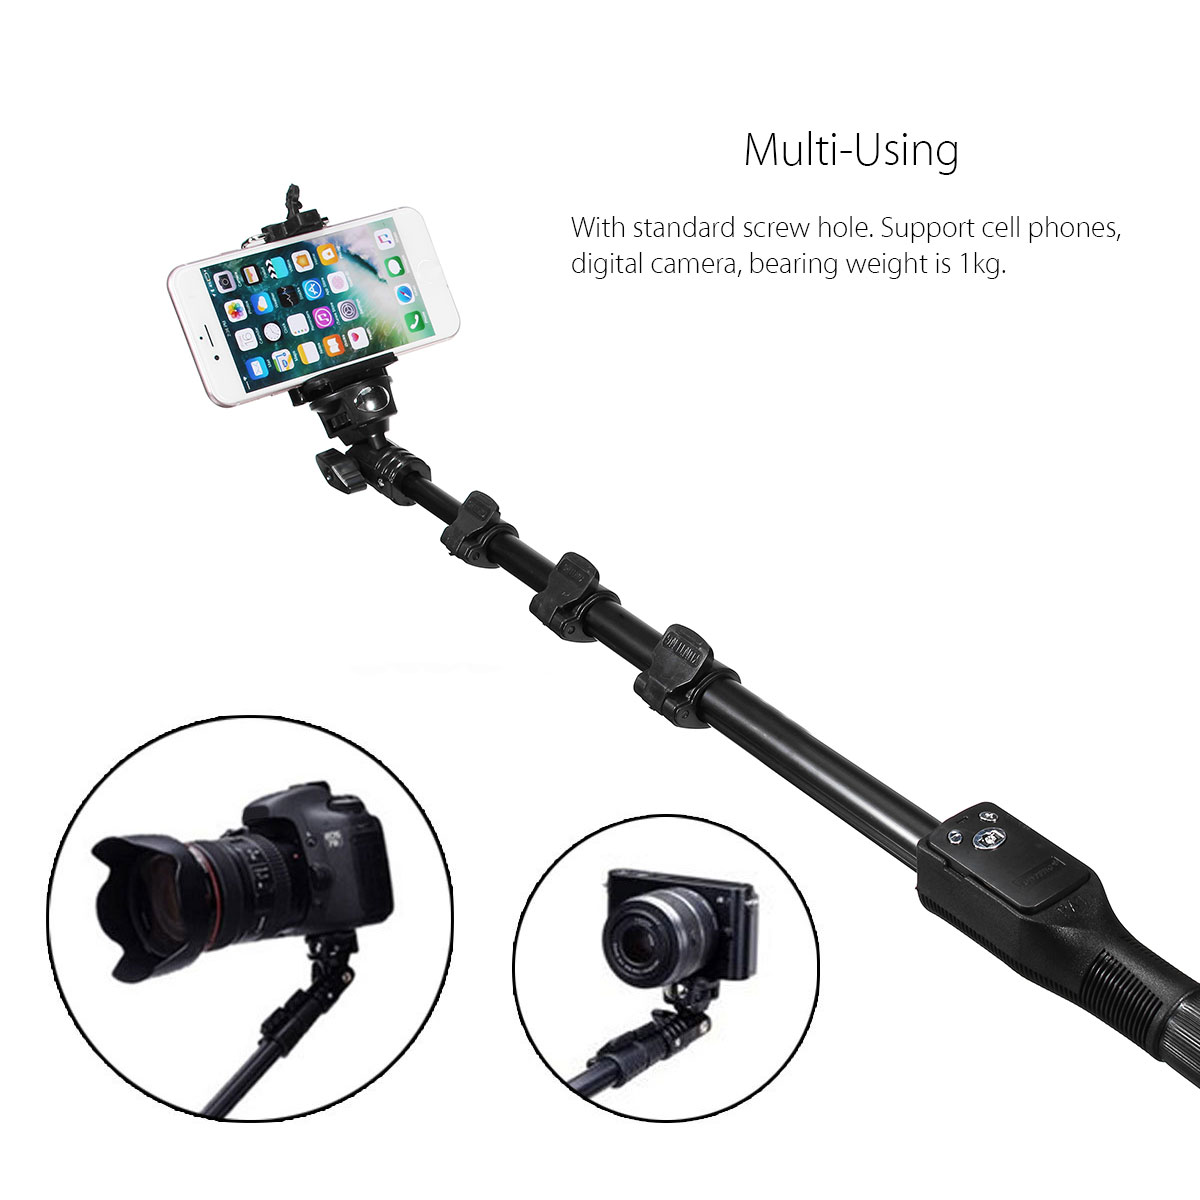 bluetooth-Wireless-Remote-Control-Extendable-Handheld-Selfie-Stick-Monopod--Tripod-for-Camera-Mobile-1340611-3